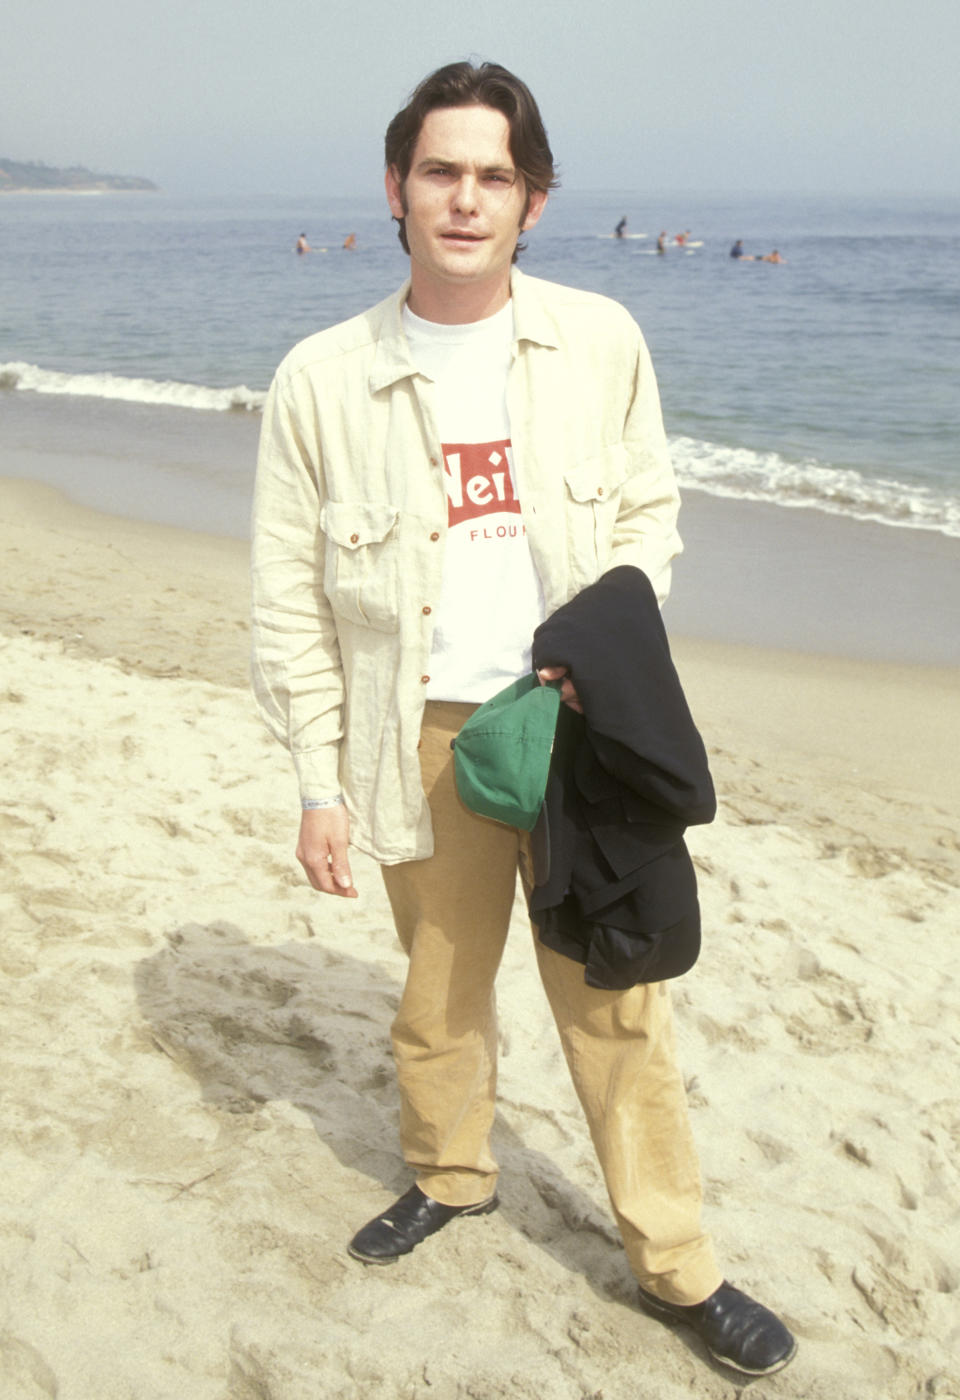 Actor Henry Thomas attends the 'Clueless' Malibu Premiere on July 7, 1995 at Leo Carrillo State Beach in Malibu, California. (Photo by Ron Galella, Ltd./Ron Galella Collection via Getty Images)